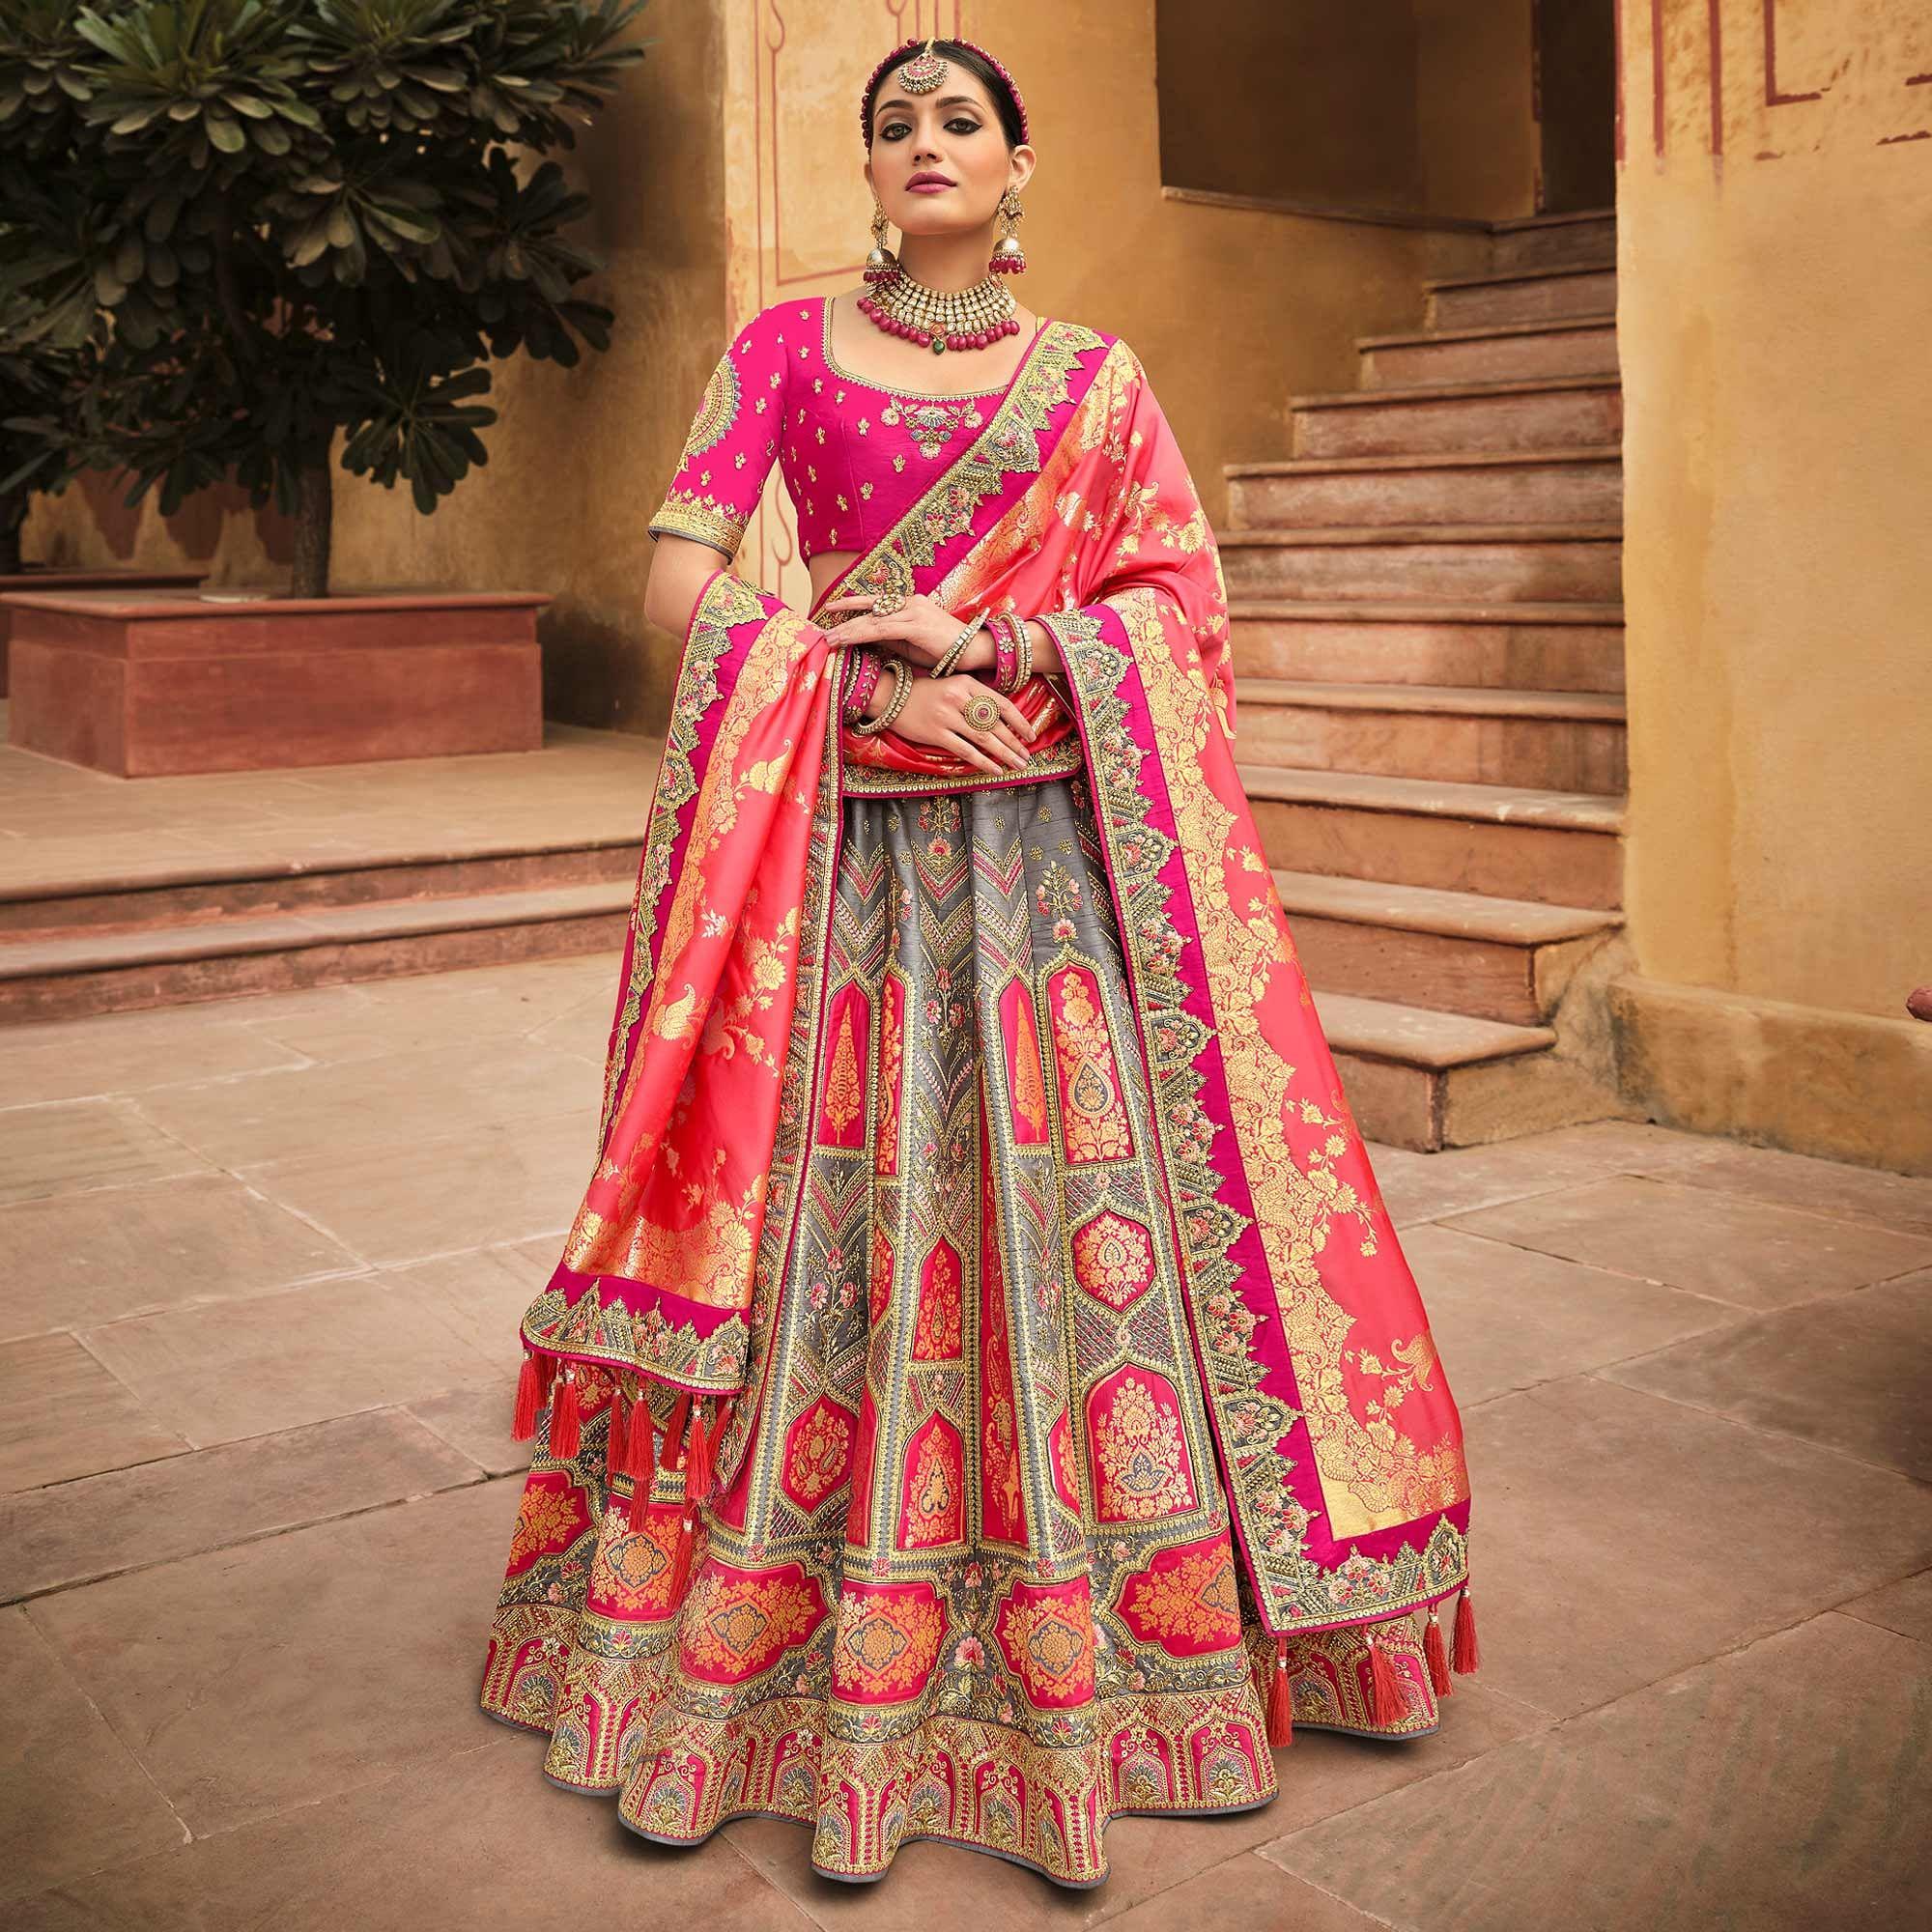 What is the difference between Lehenga and Saree? - Quora